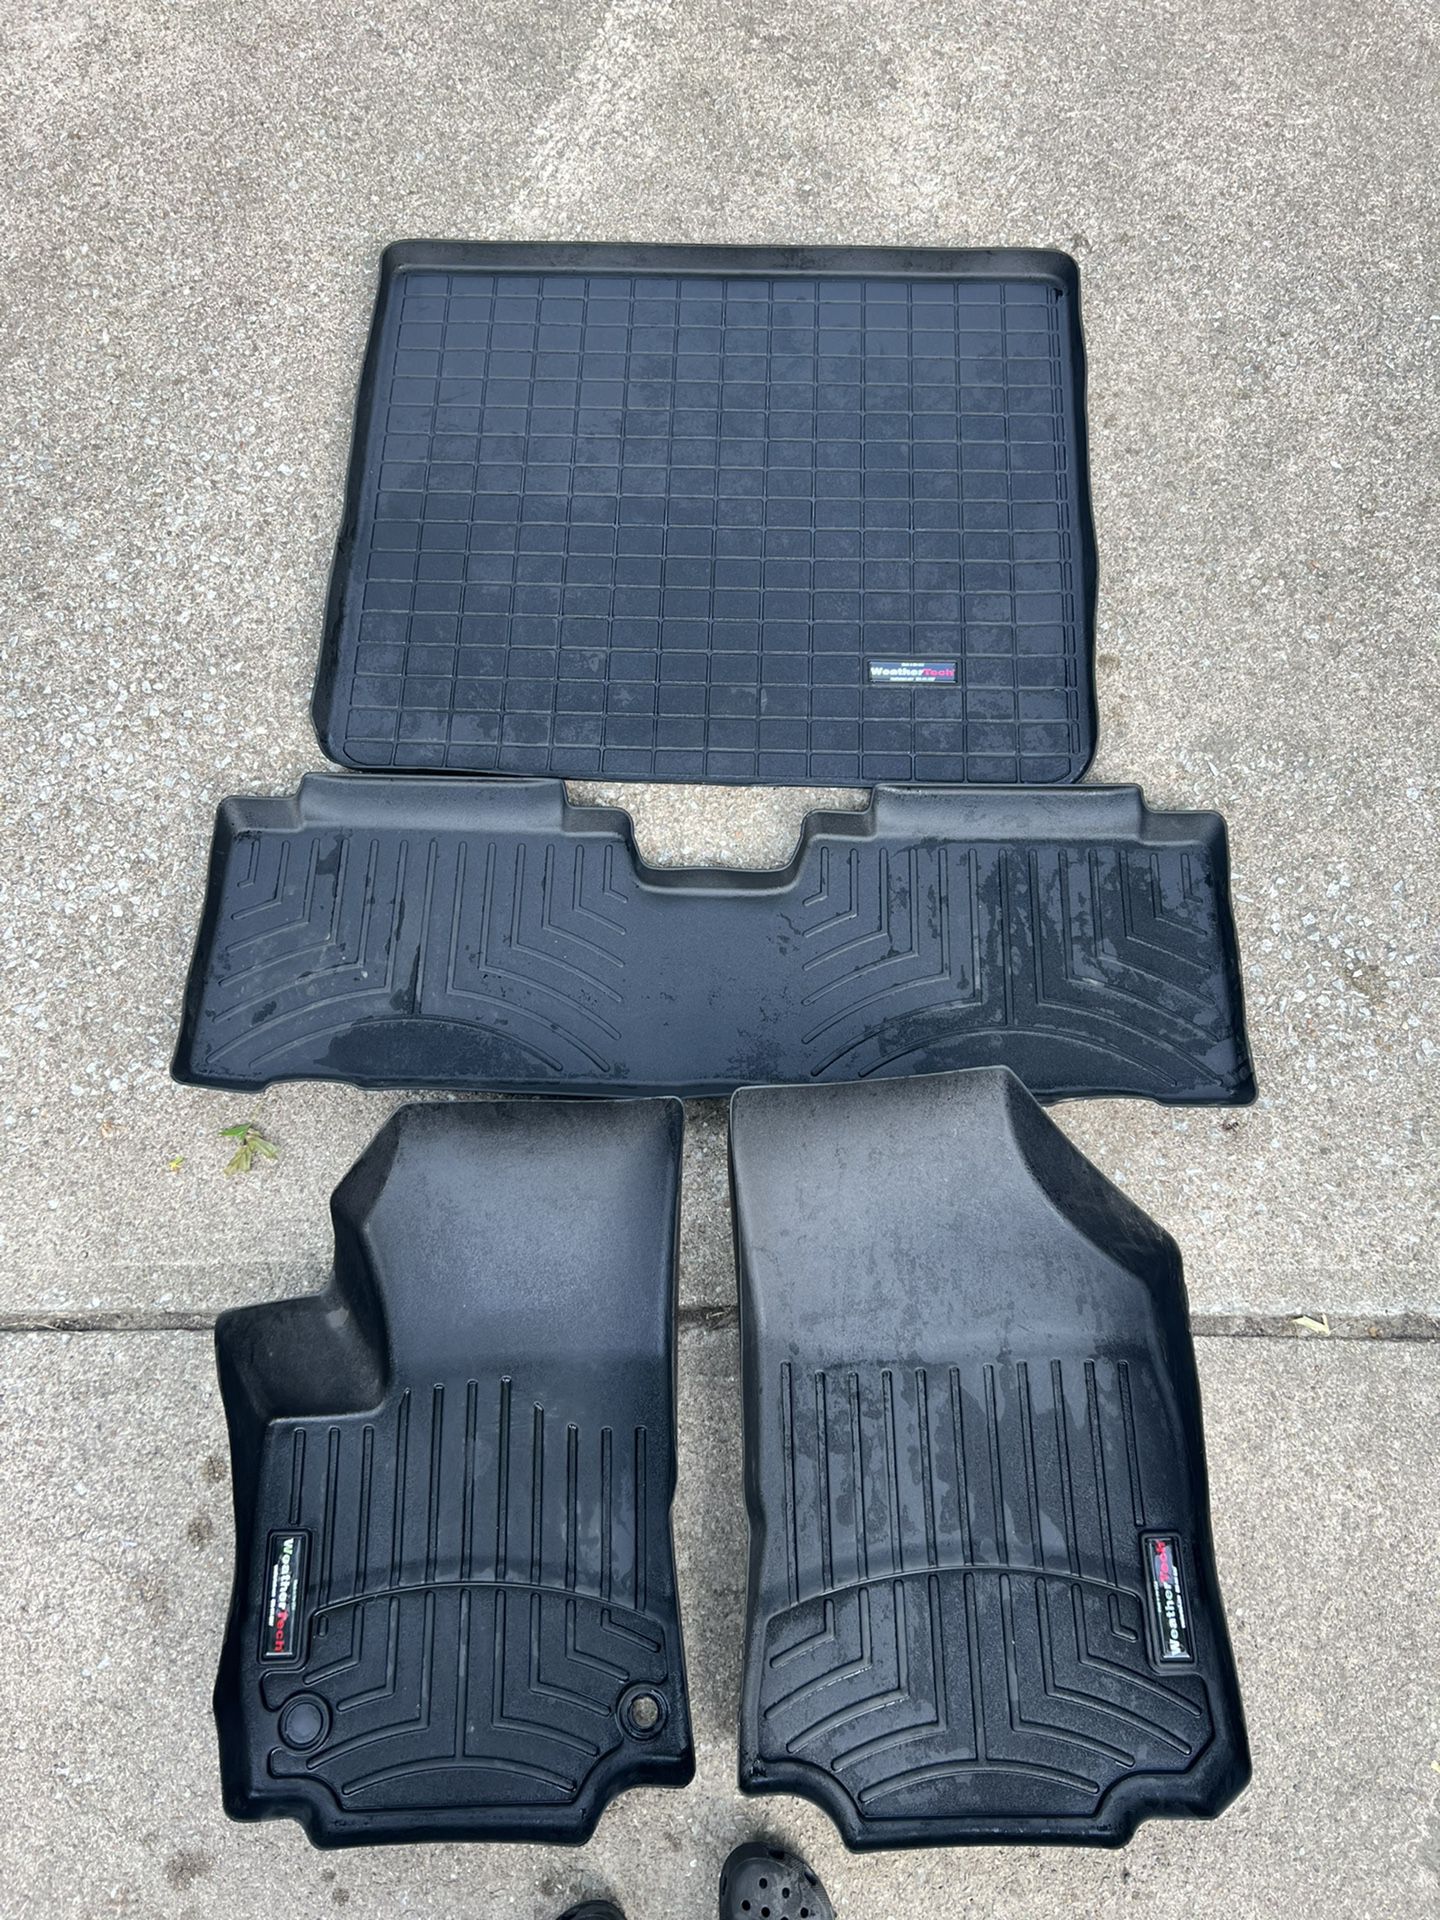 Chevy Equinox Weathertech Mats For Sale